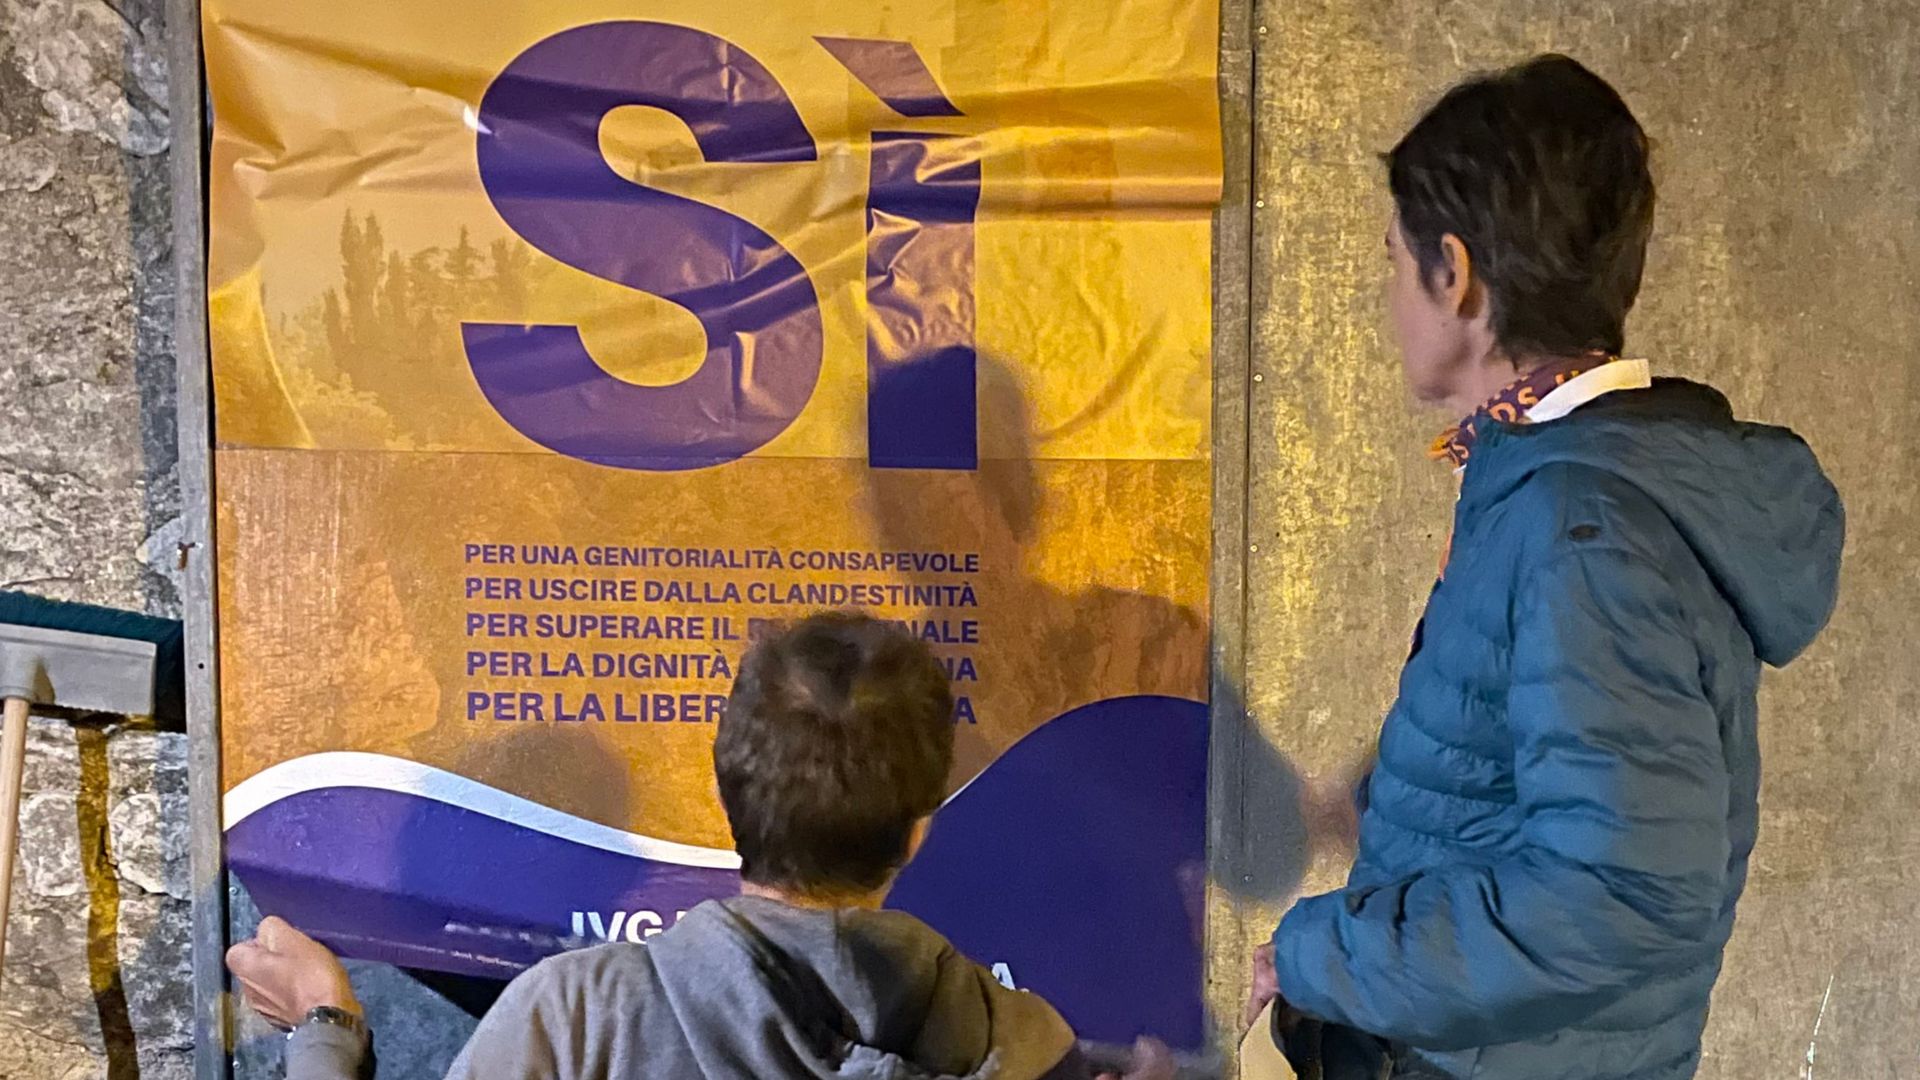 Pro-abortion activists put up posters at the start of the campaign on September 9, 2021 in San Marino